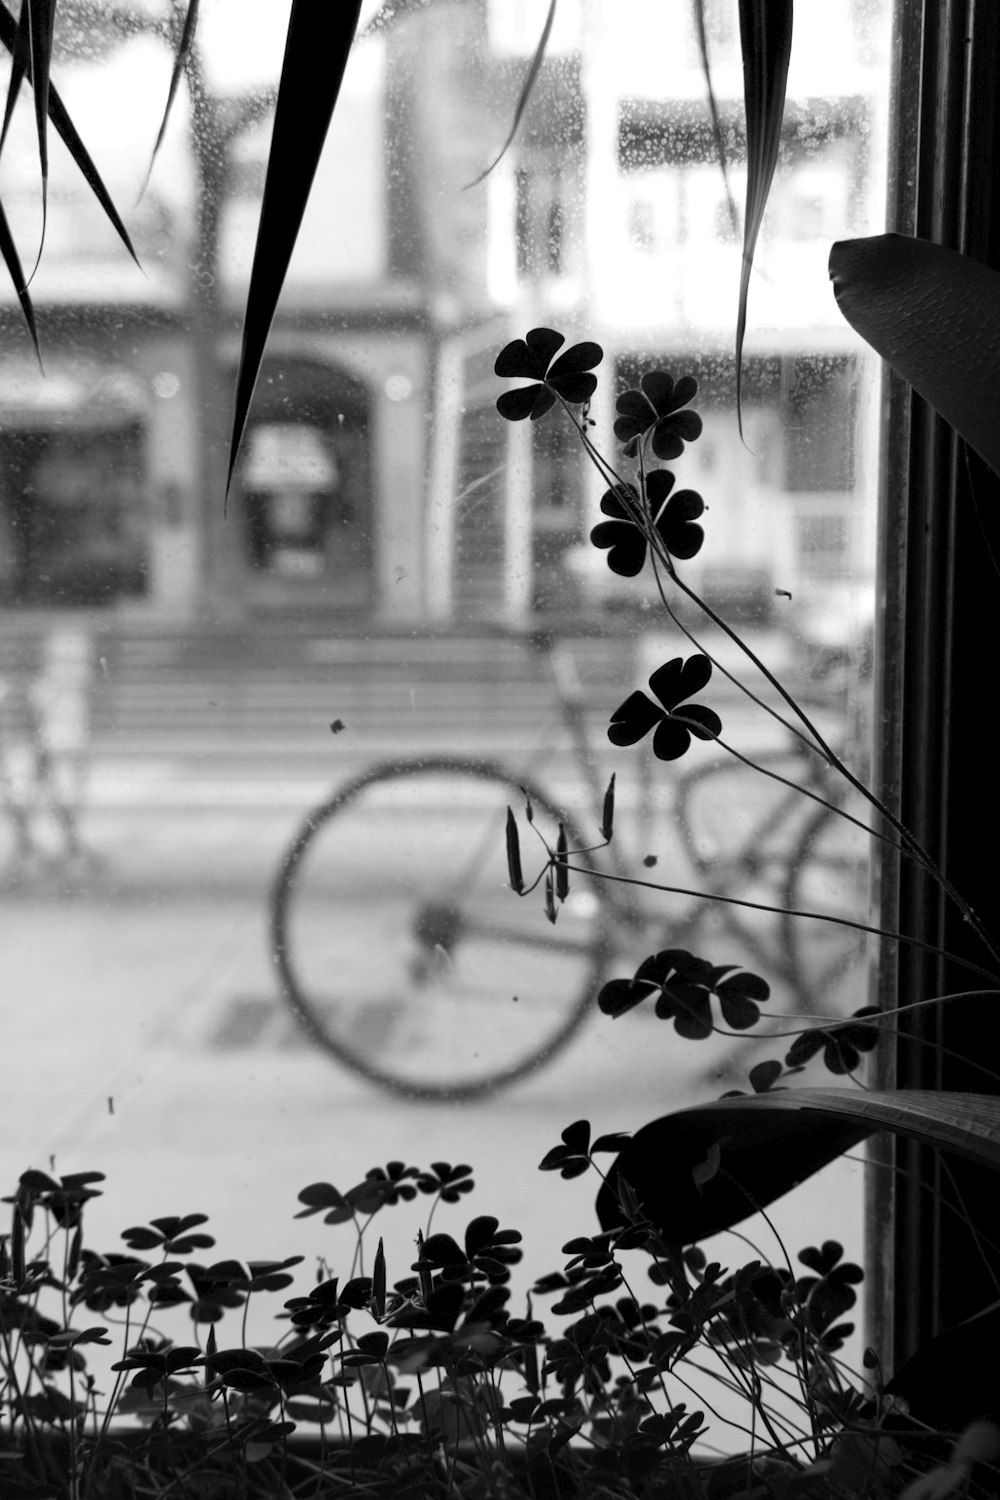 a bicycle is seen through the window of a building